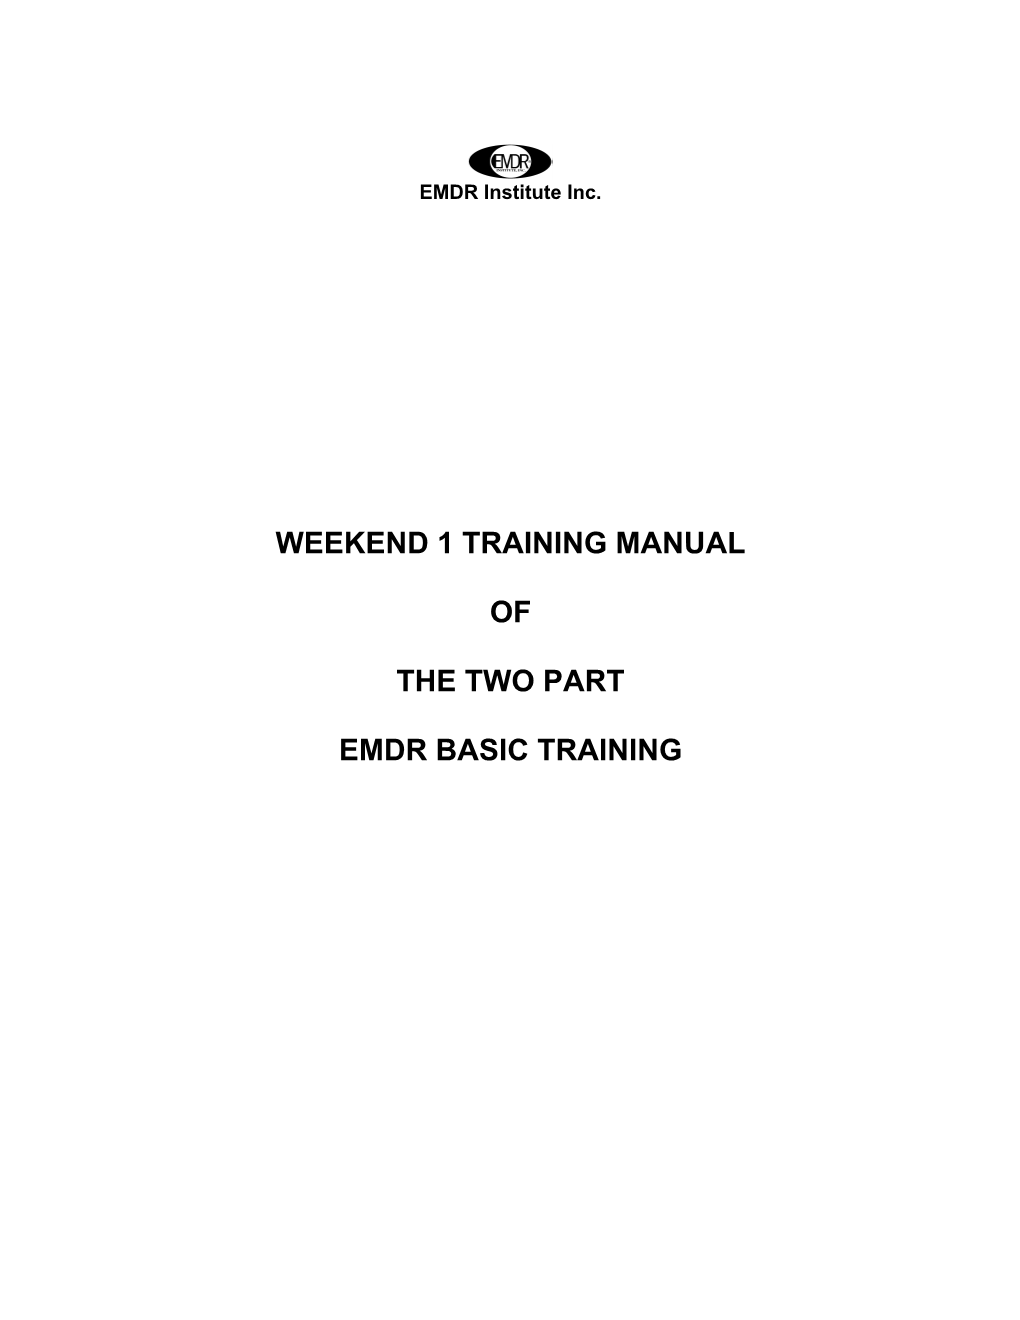 Weekend 1 Training Manual of the Two Part Emdr Basic Training